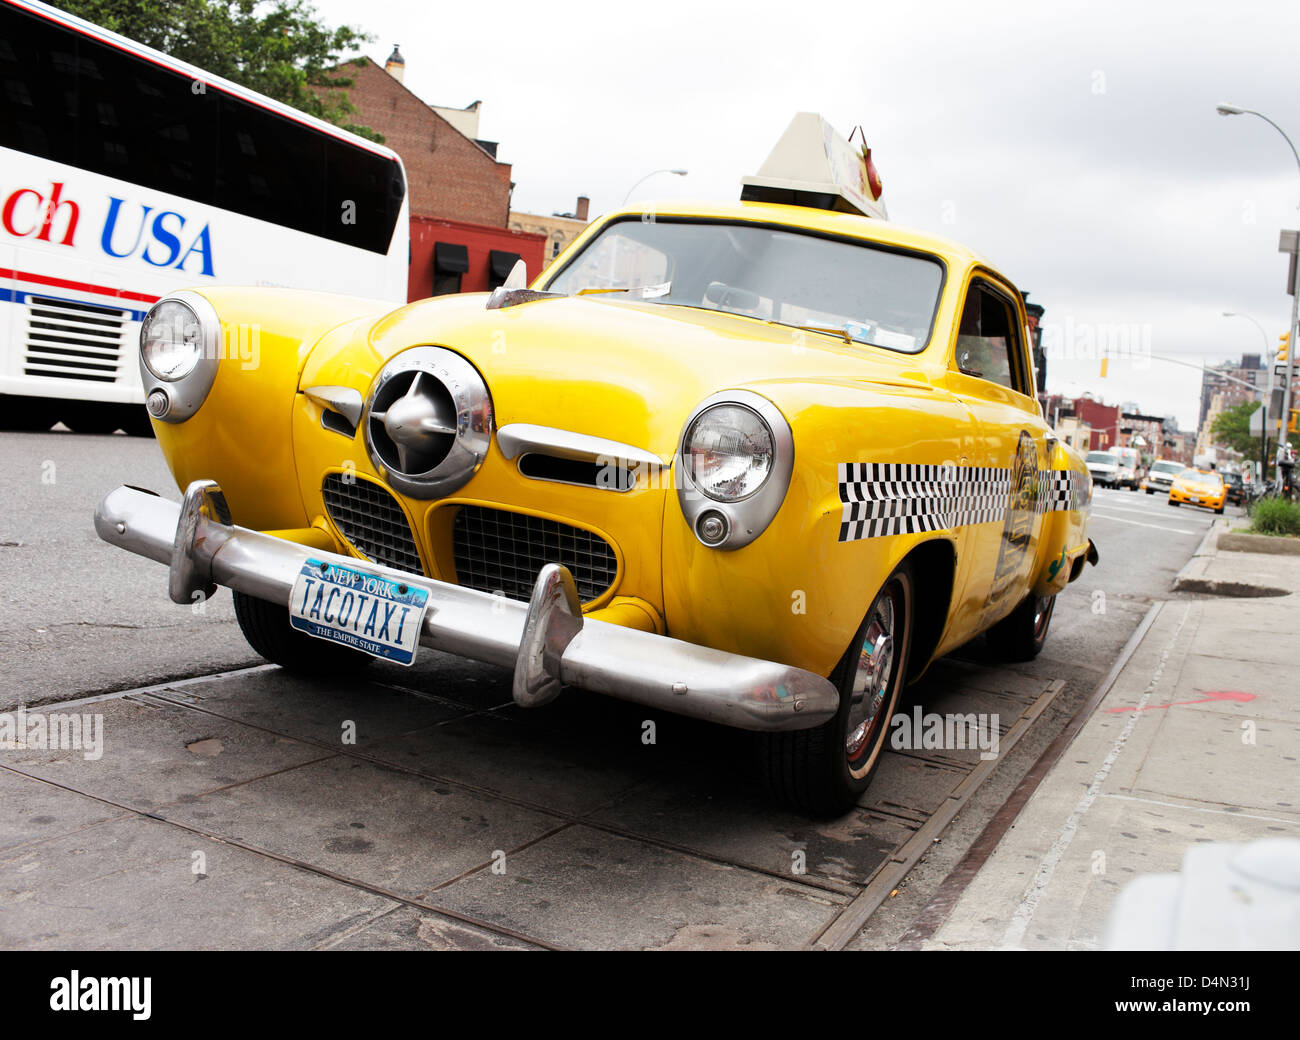 NEW YORK CITY, USA - JUNE 12: Old Studebaker brand car serving as a 'Taxo Taxi'. June 12, 2012 in New York City, USA Stock Photo